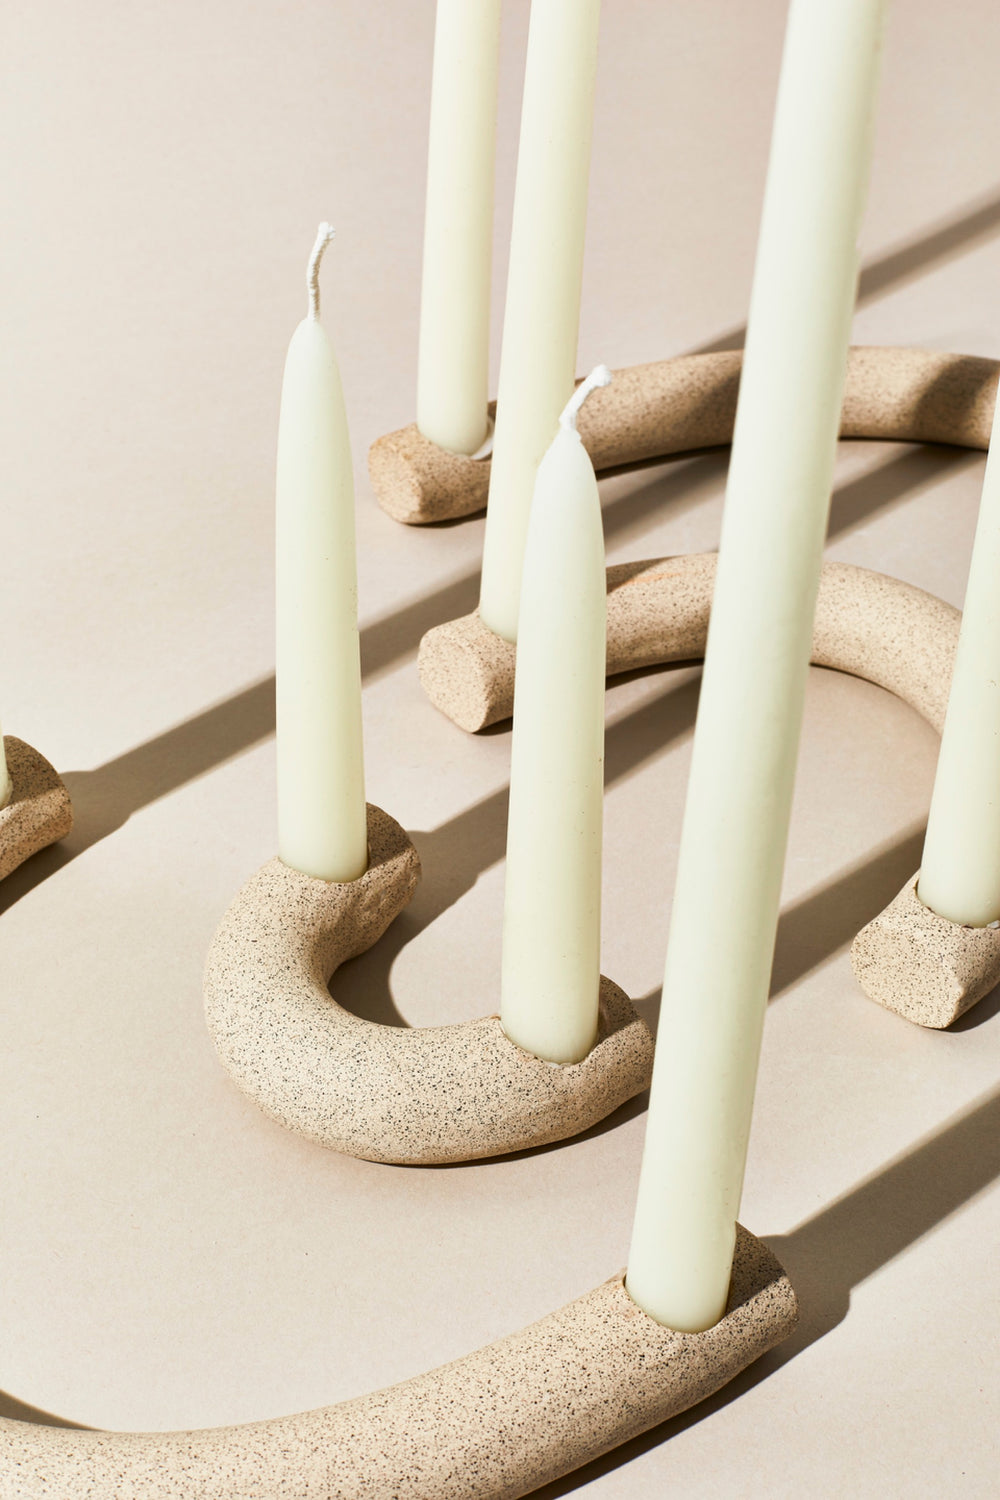 Speckled Arc Candleholders